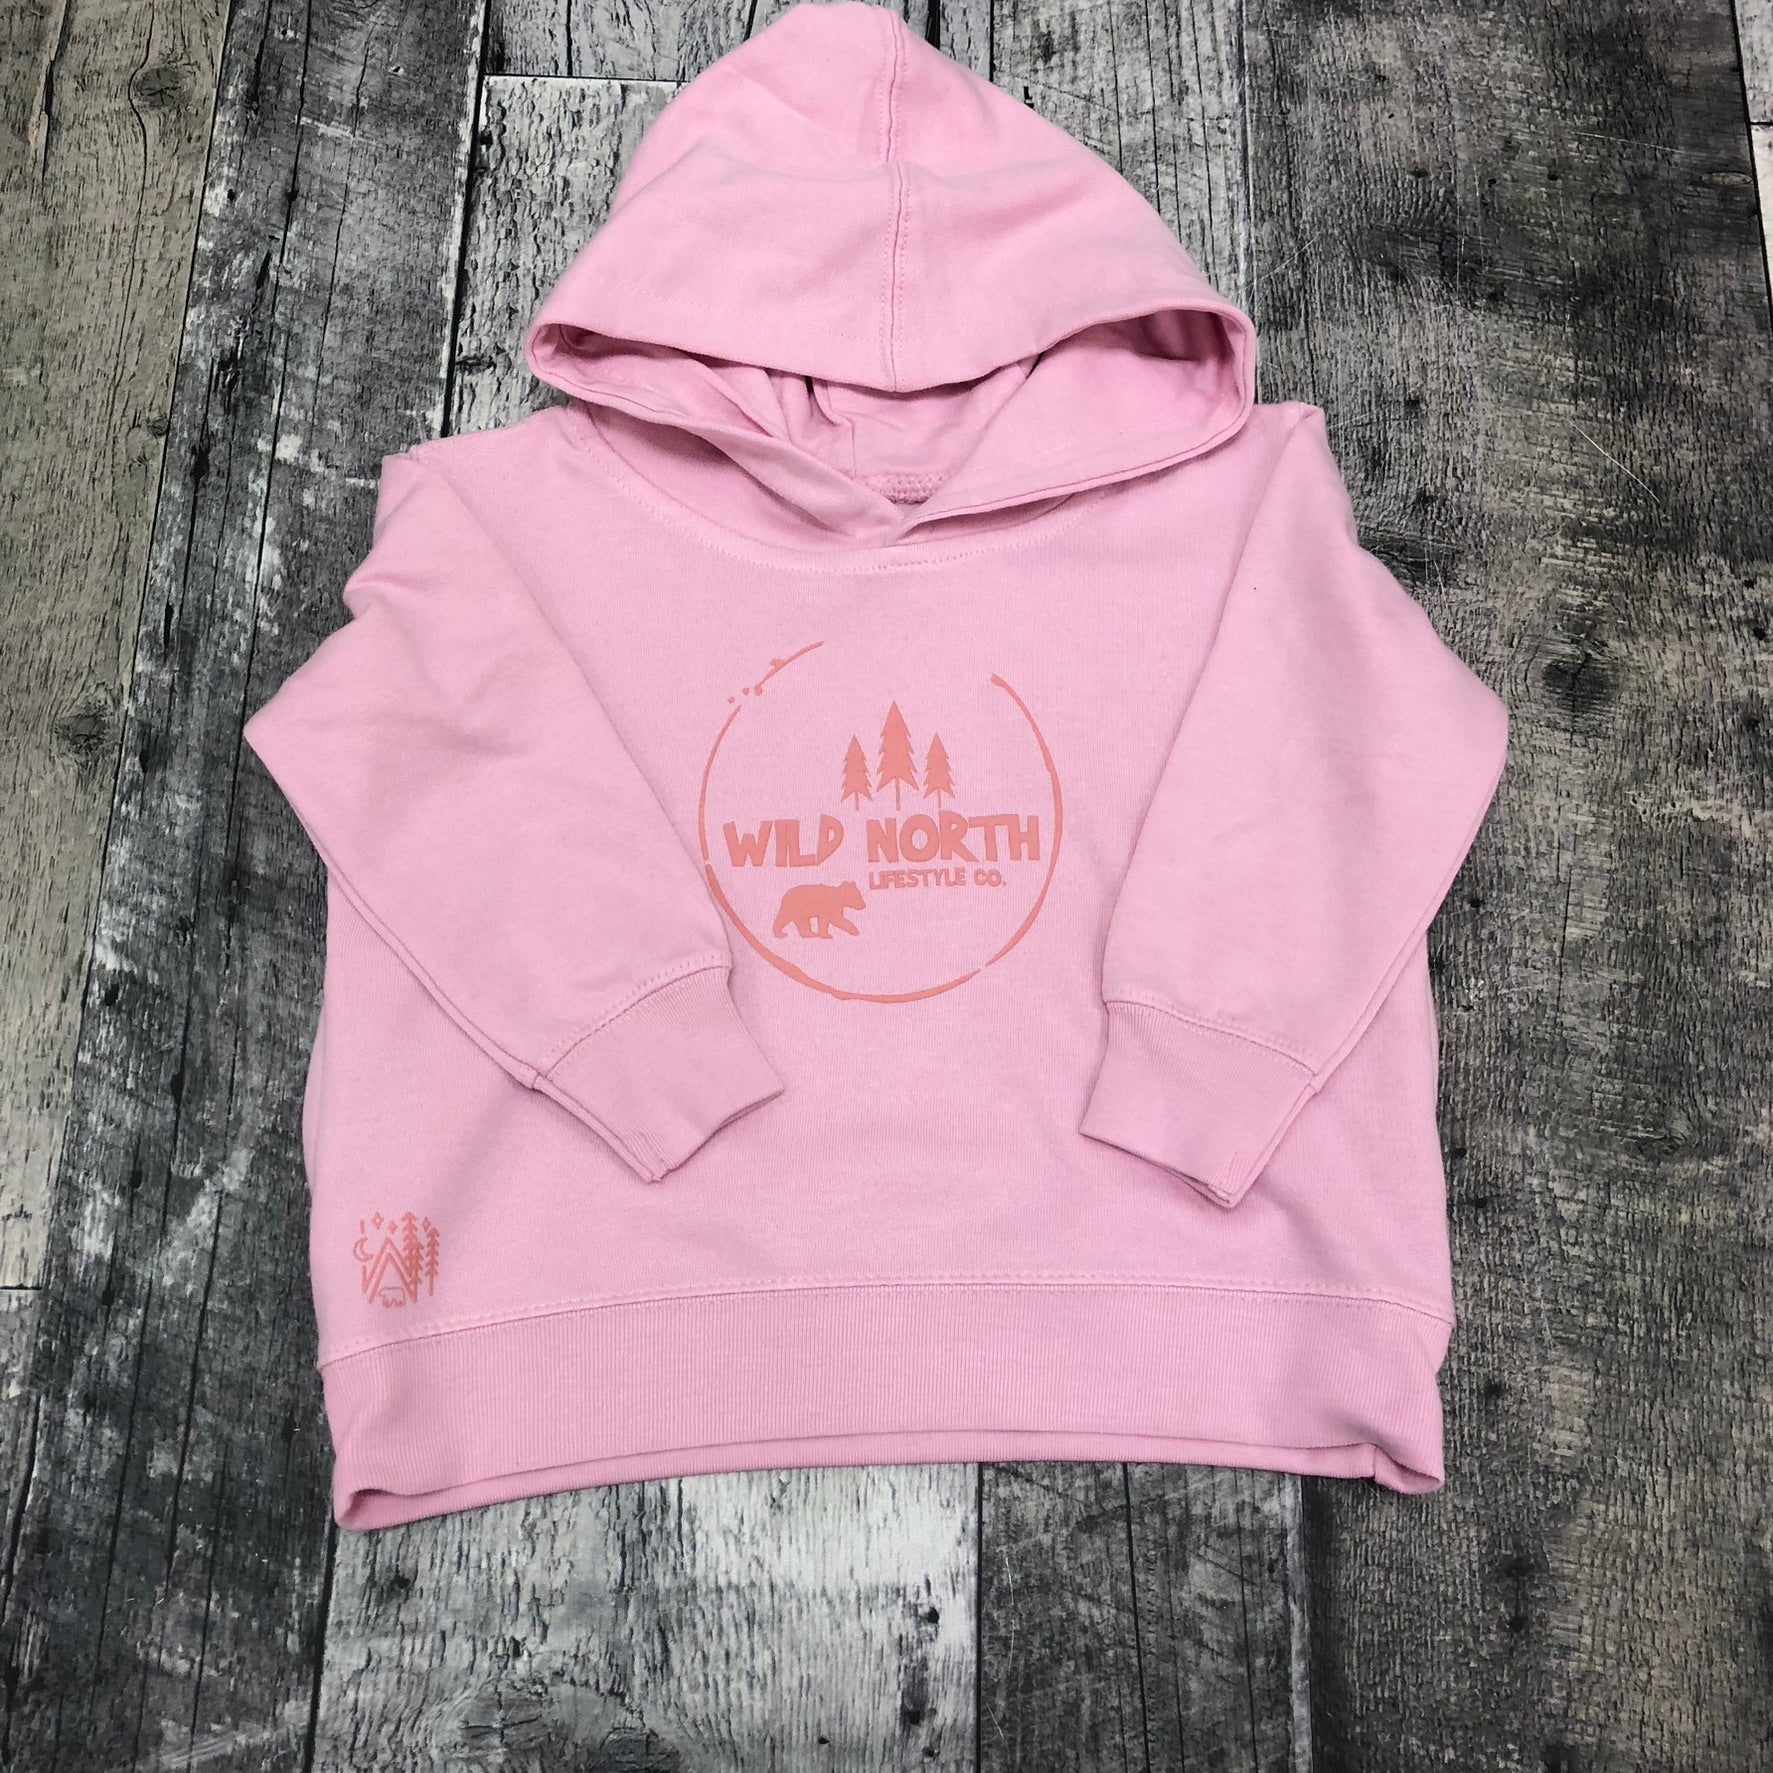 Wild North Toddler Hooded Sweatshirt - Pink Blossoms